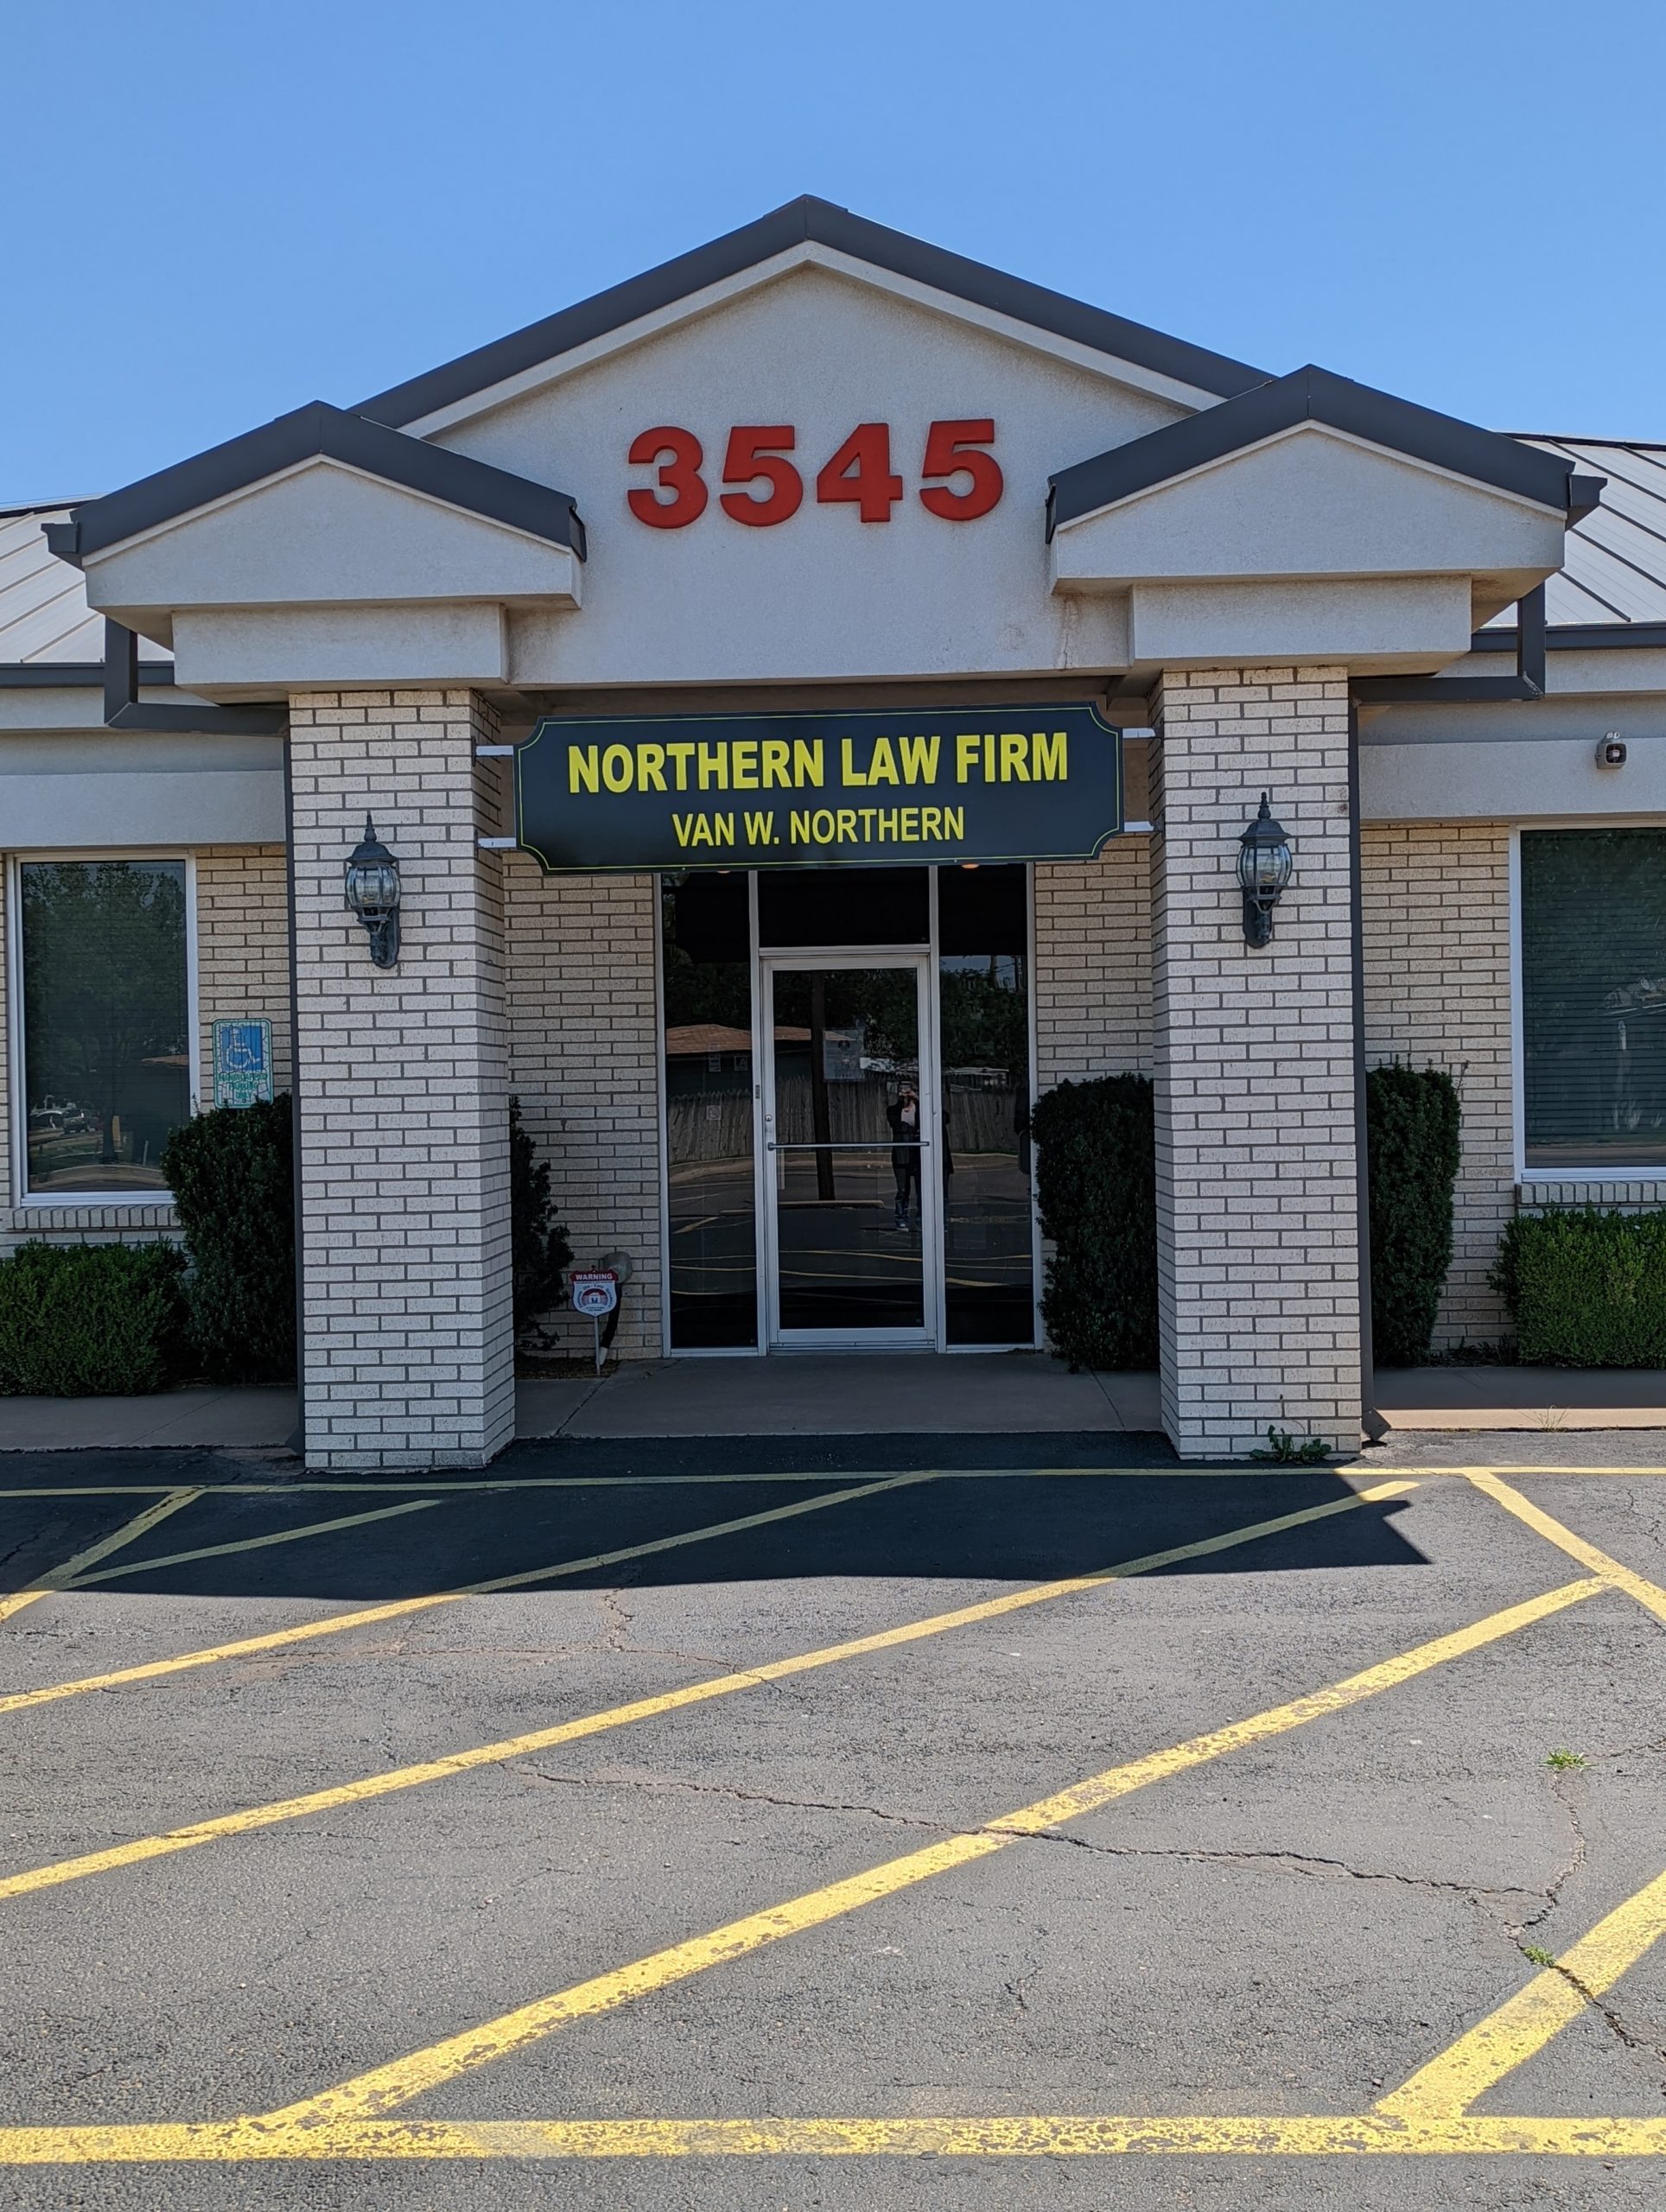 Northern Law Firm exterior